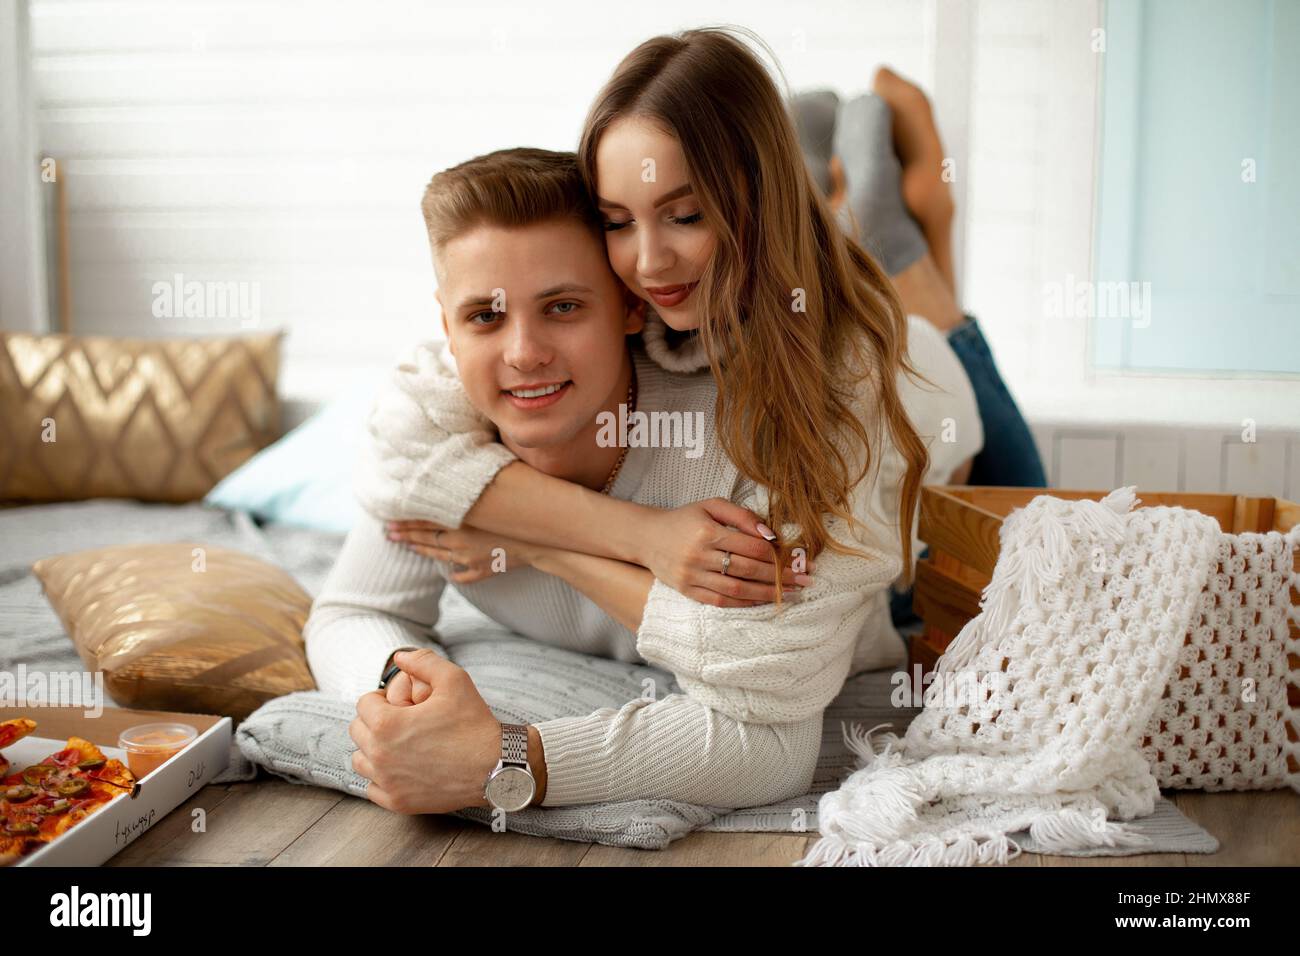 Portrait of young beautiful couple who arranged home date . Young woman hugs her lover, they are lying on floor on blanket in room. Creative date Stock Photo